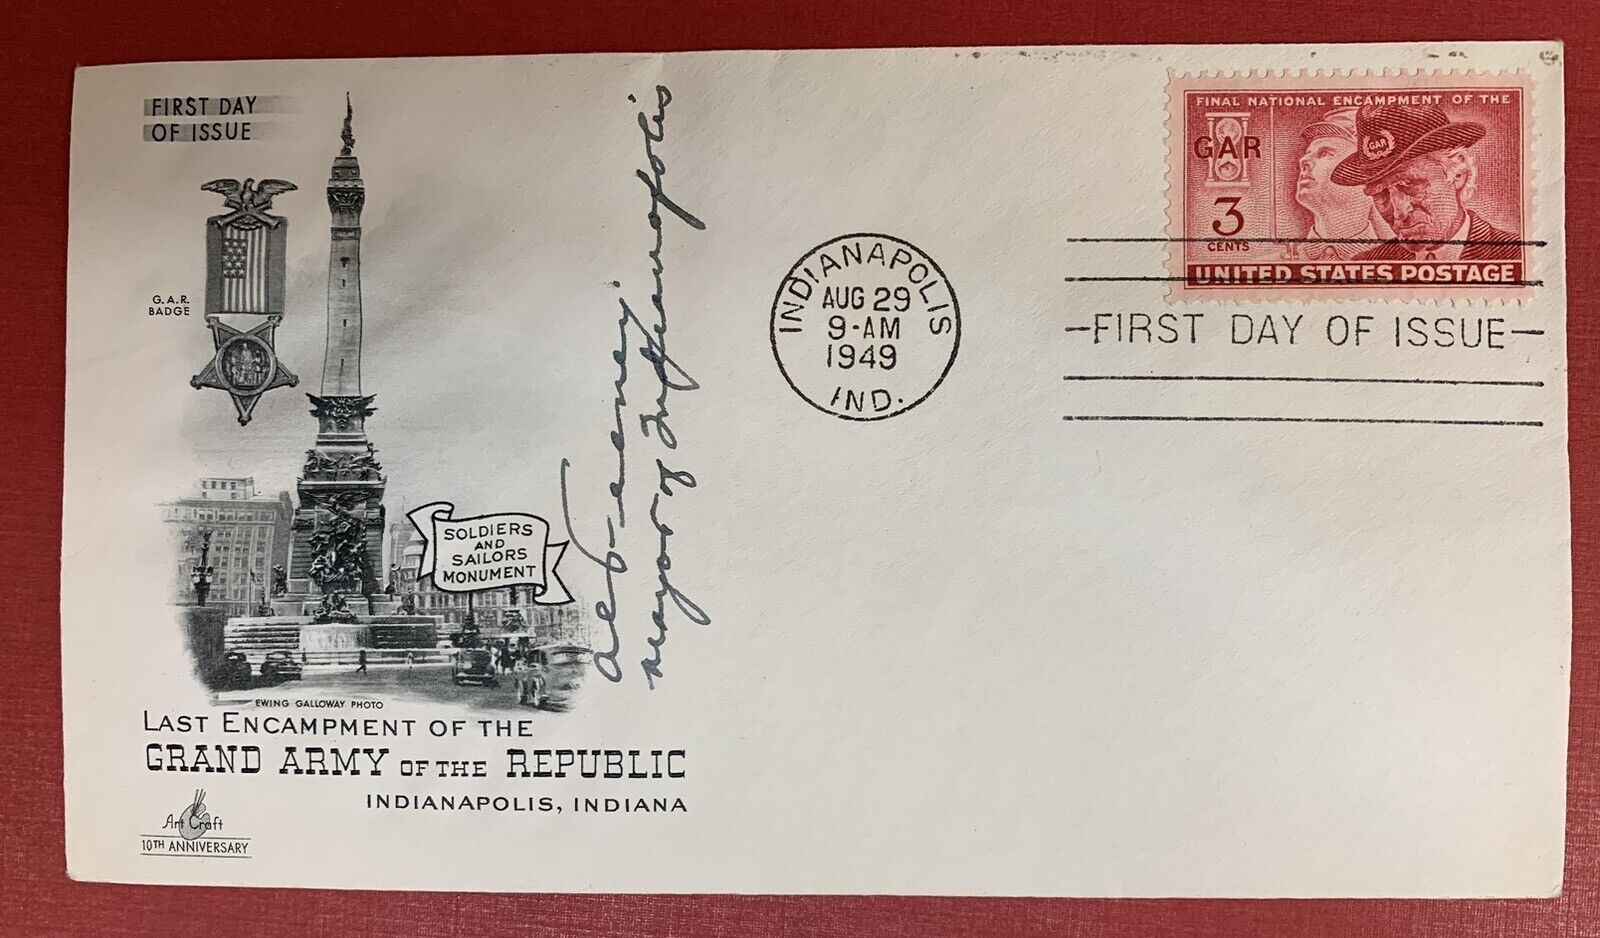 Albert G. Feeney, Mayor of Indianapolis, Autograph on Scott #985 First Day Cover